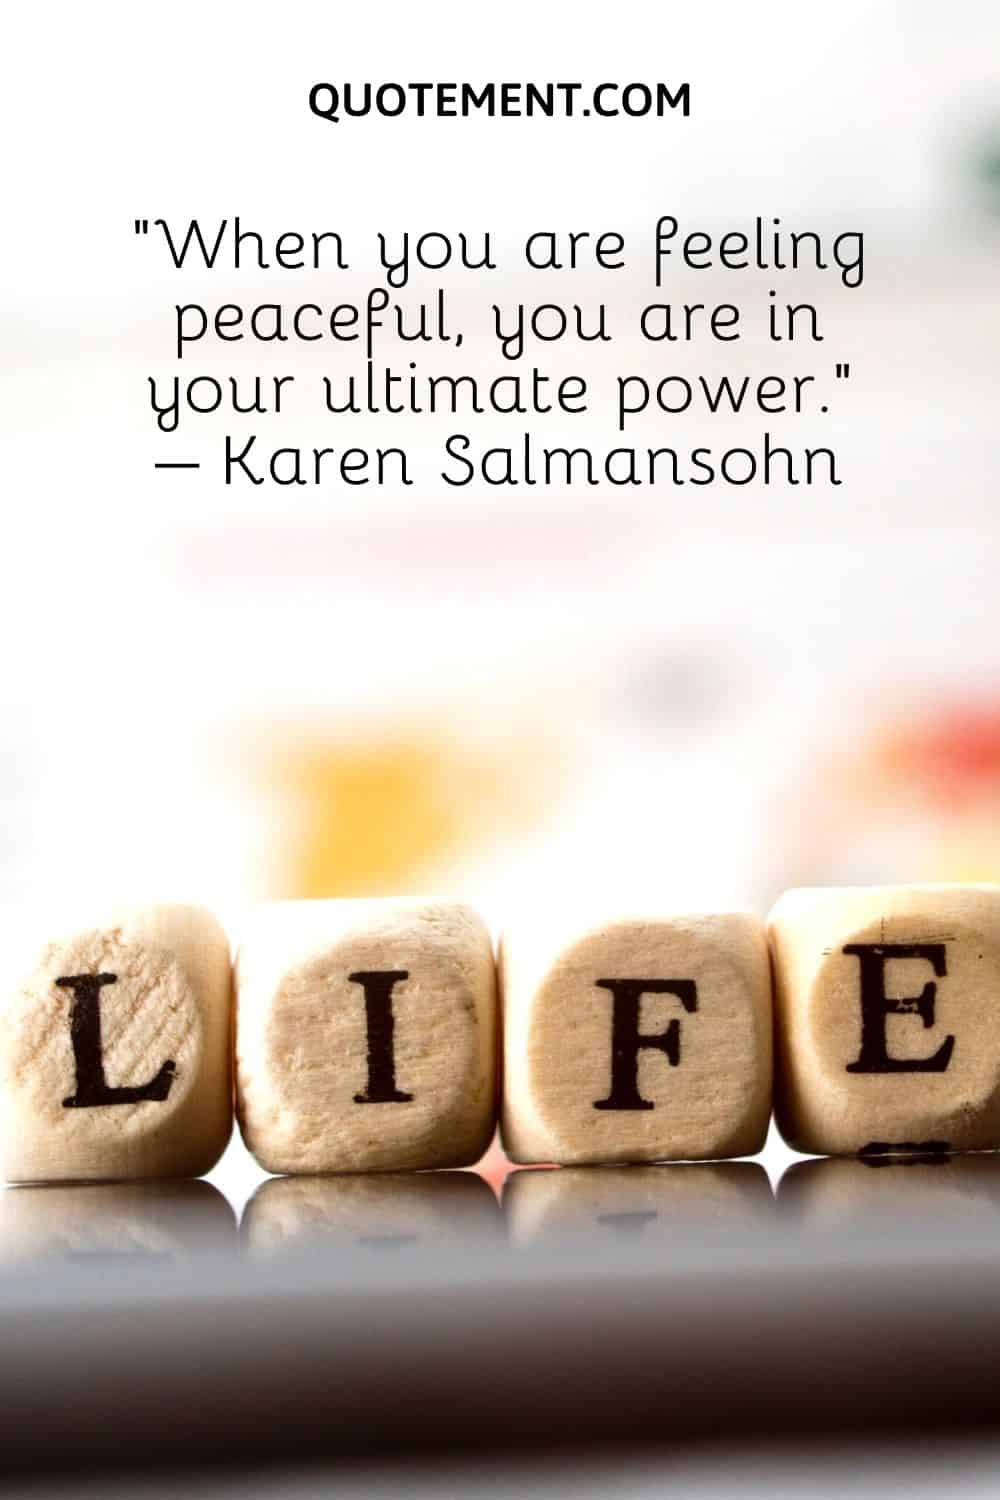 When you are feeling peaceful, you are in your ultimate power.